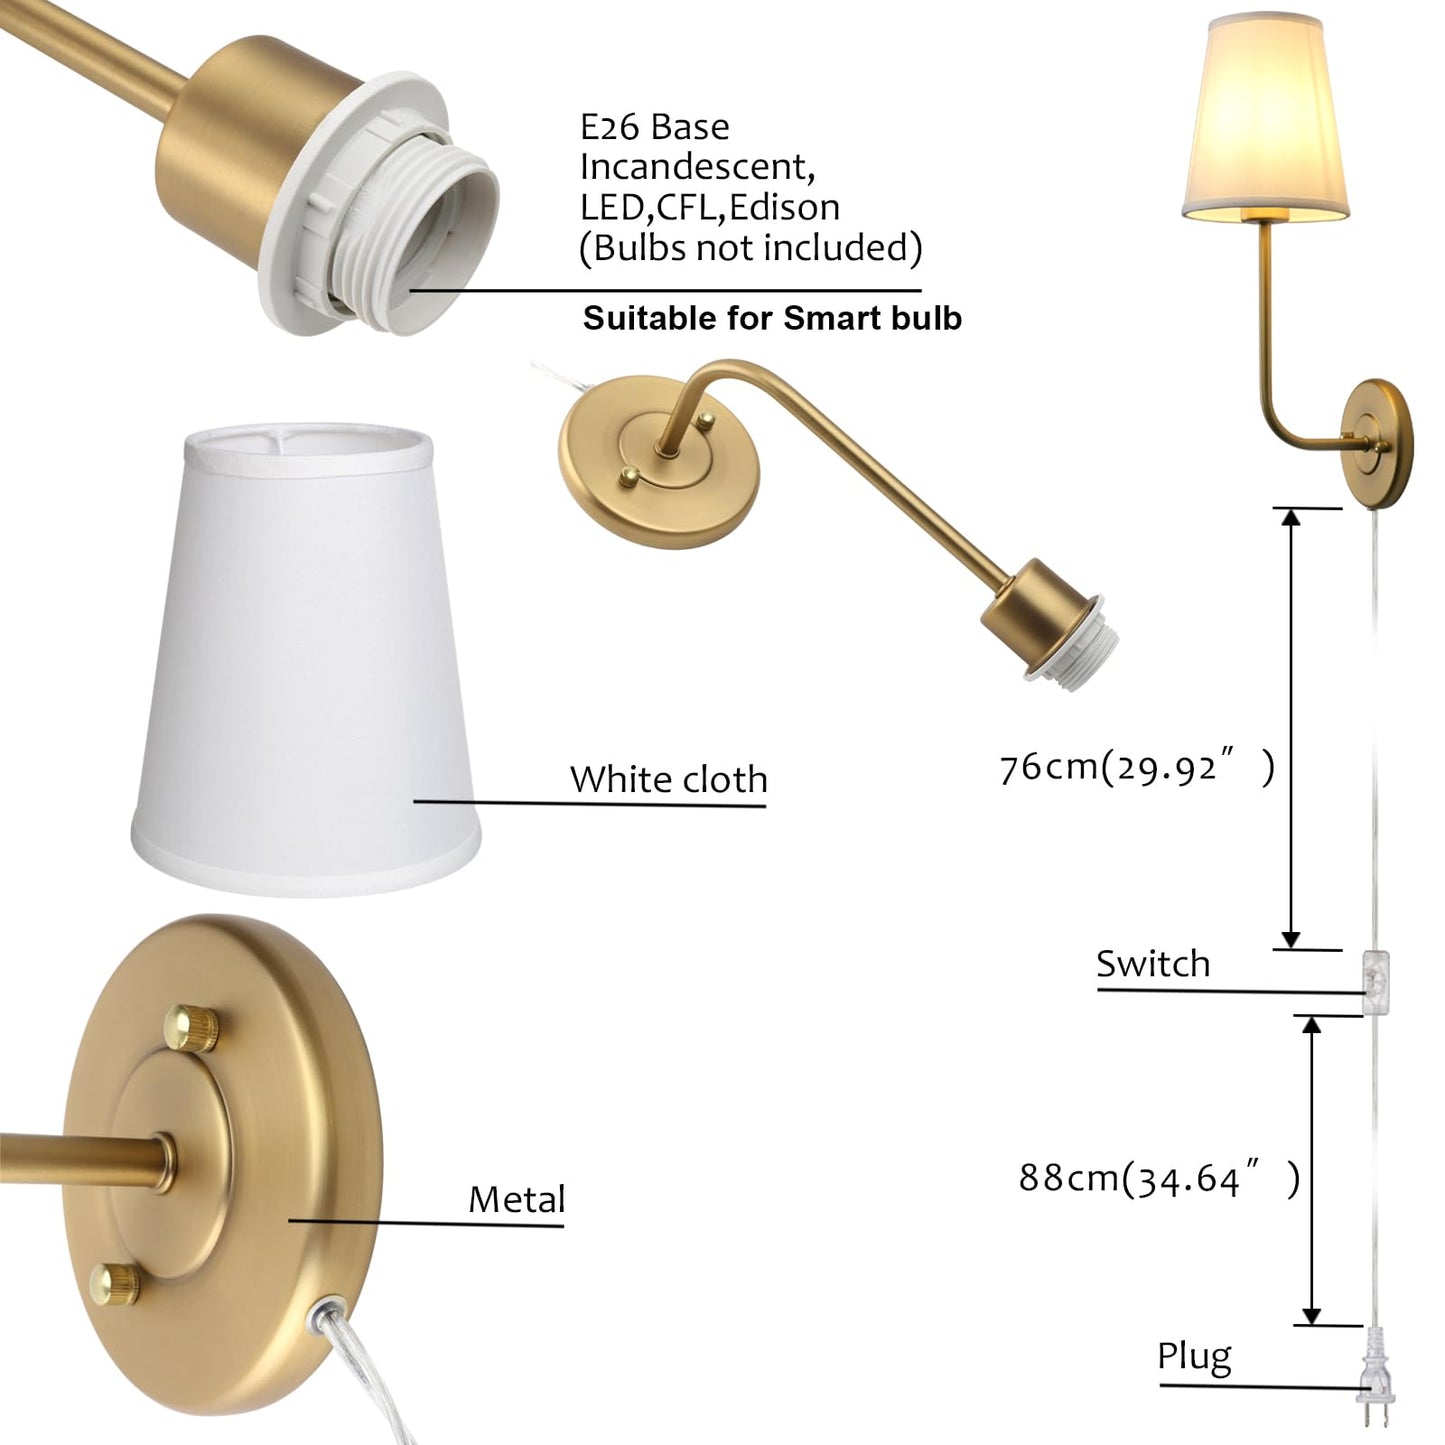 Set of 2 Plug in Wall Sconces, Pure White Fabric Lampshade, Antique Brass Wall Lamps